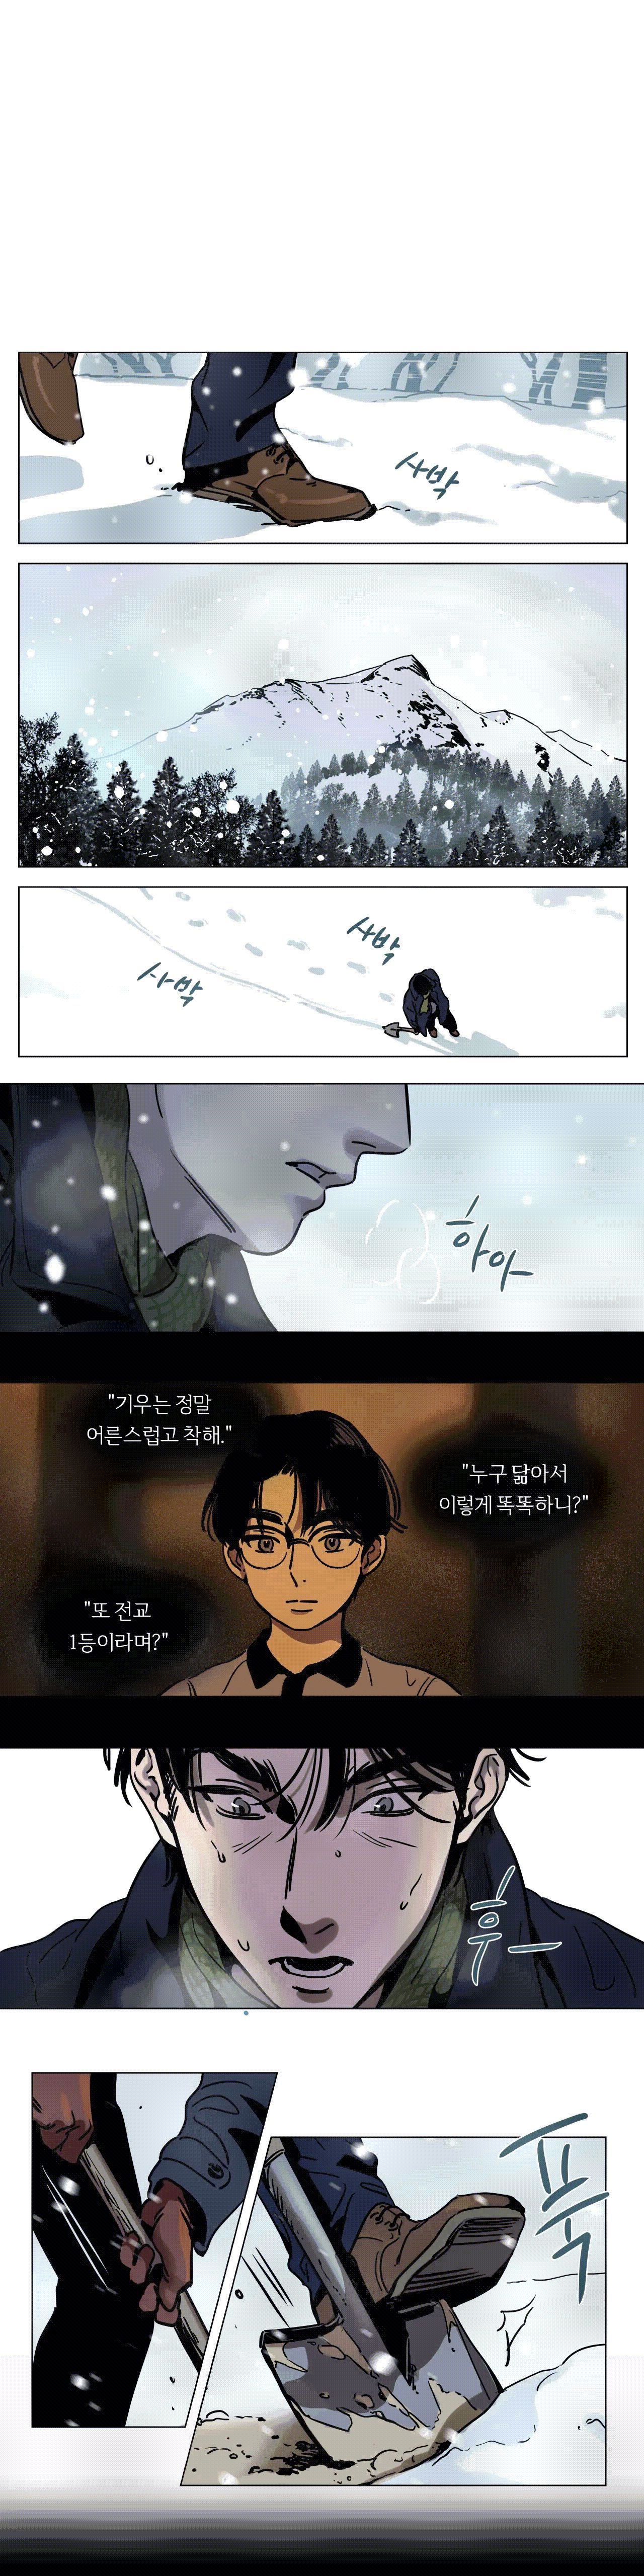 Snowman Raw - Chapter 1 Page 1